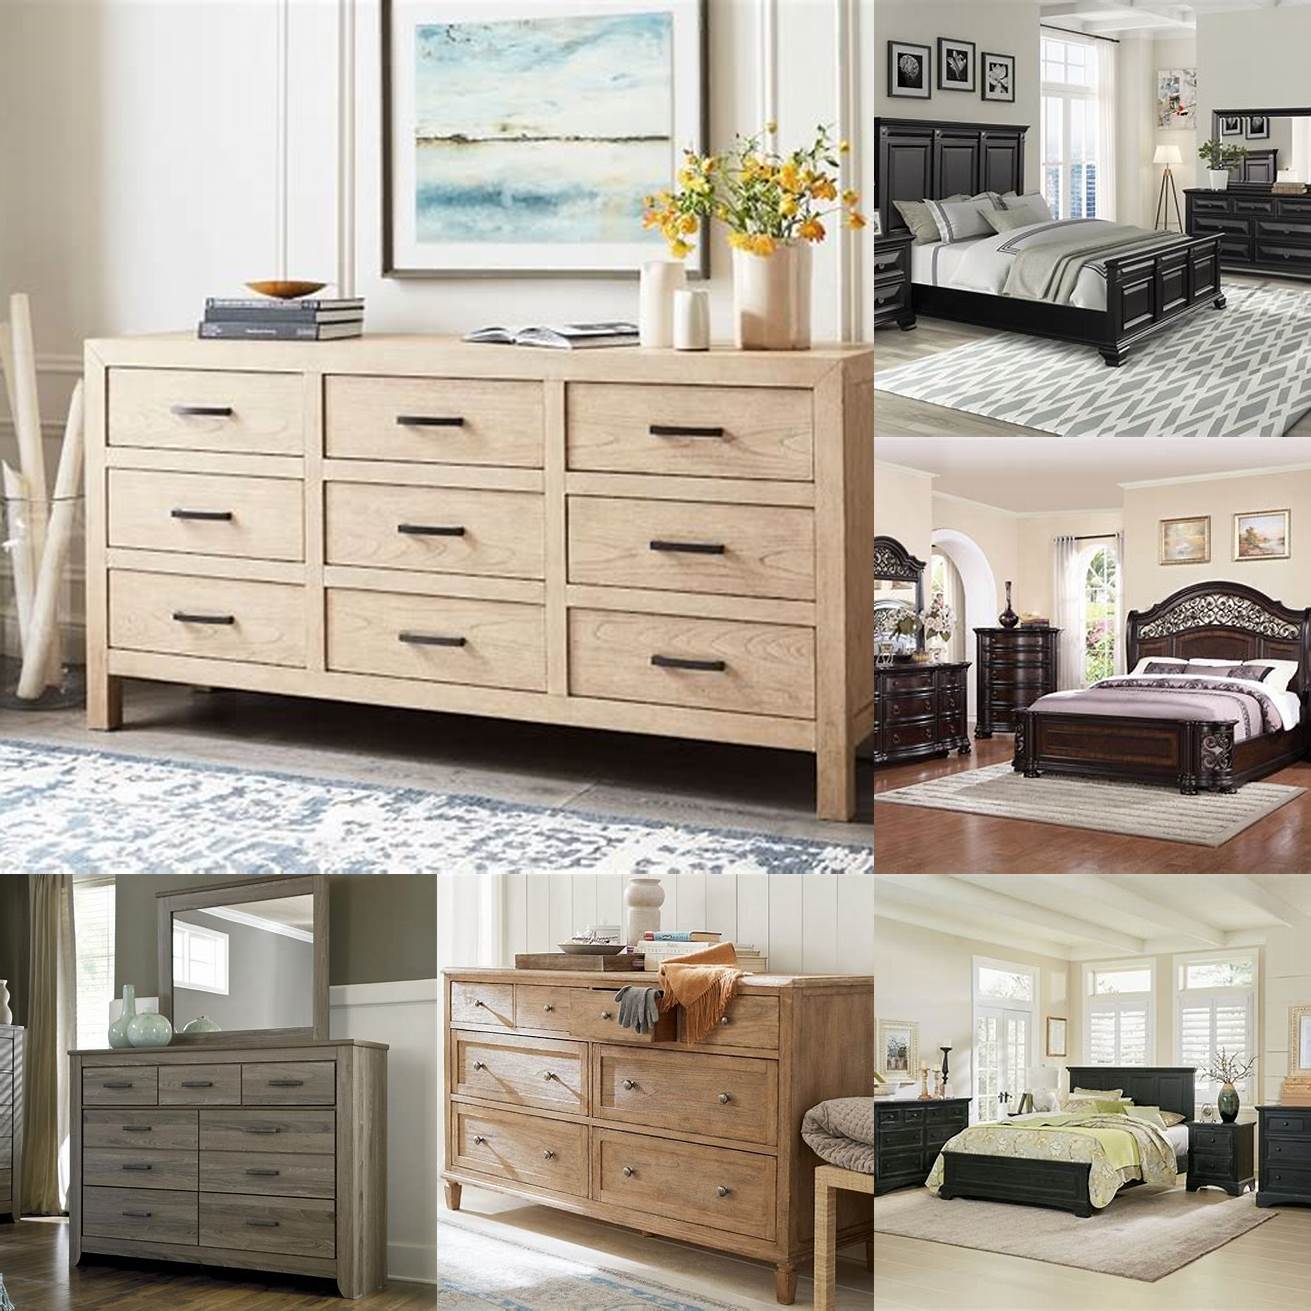 A large bedroom dresser set designed for spacious bedrooms with ample storage space